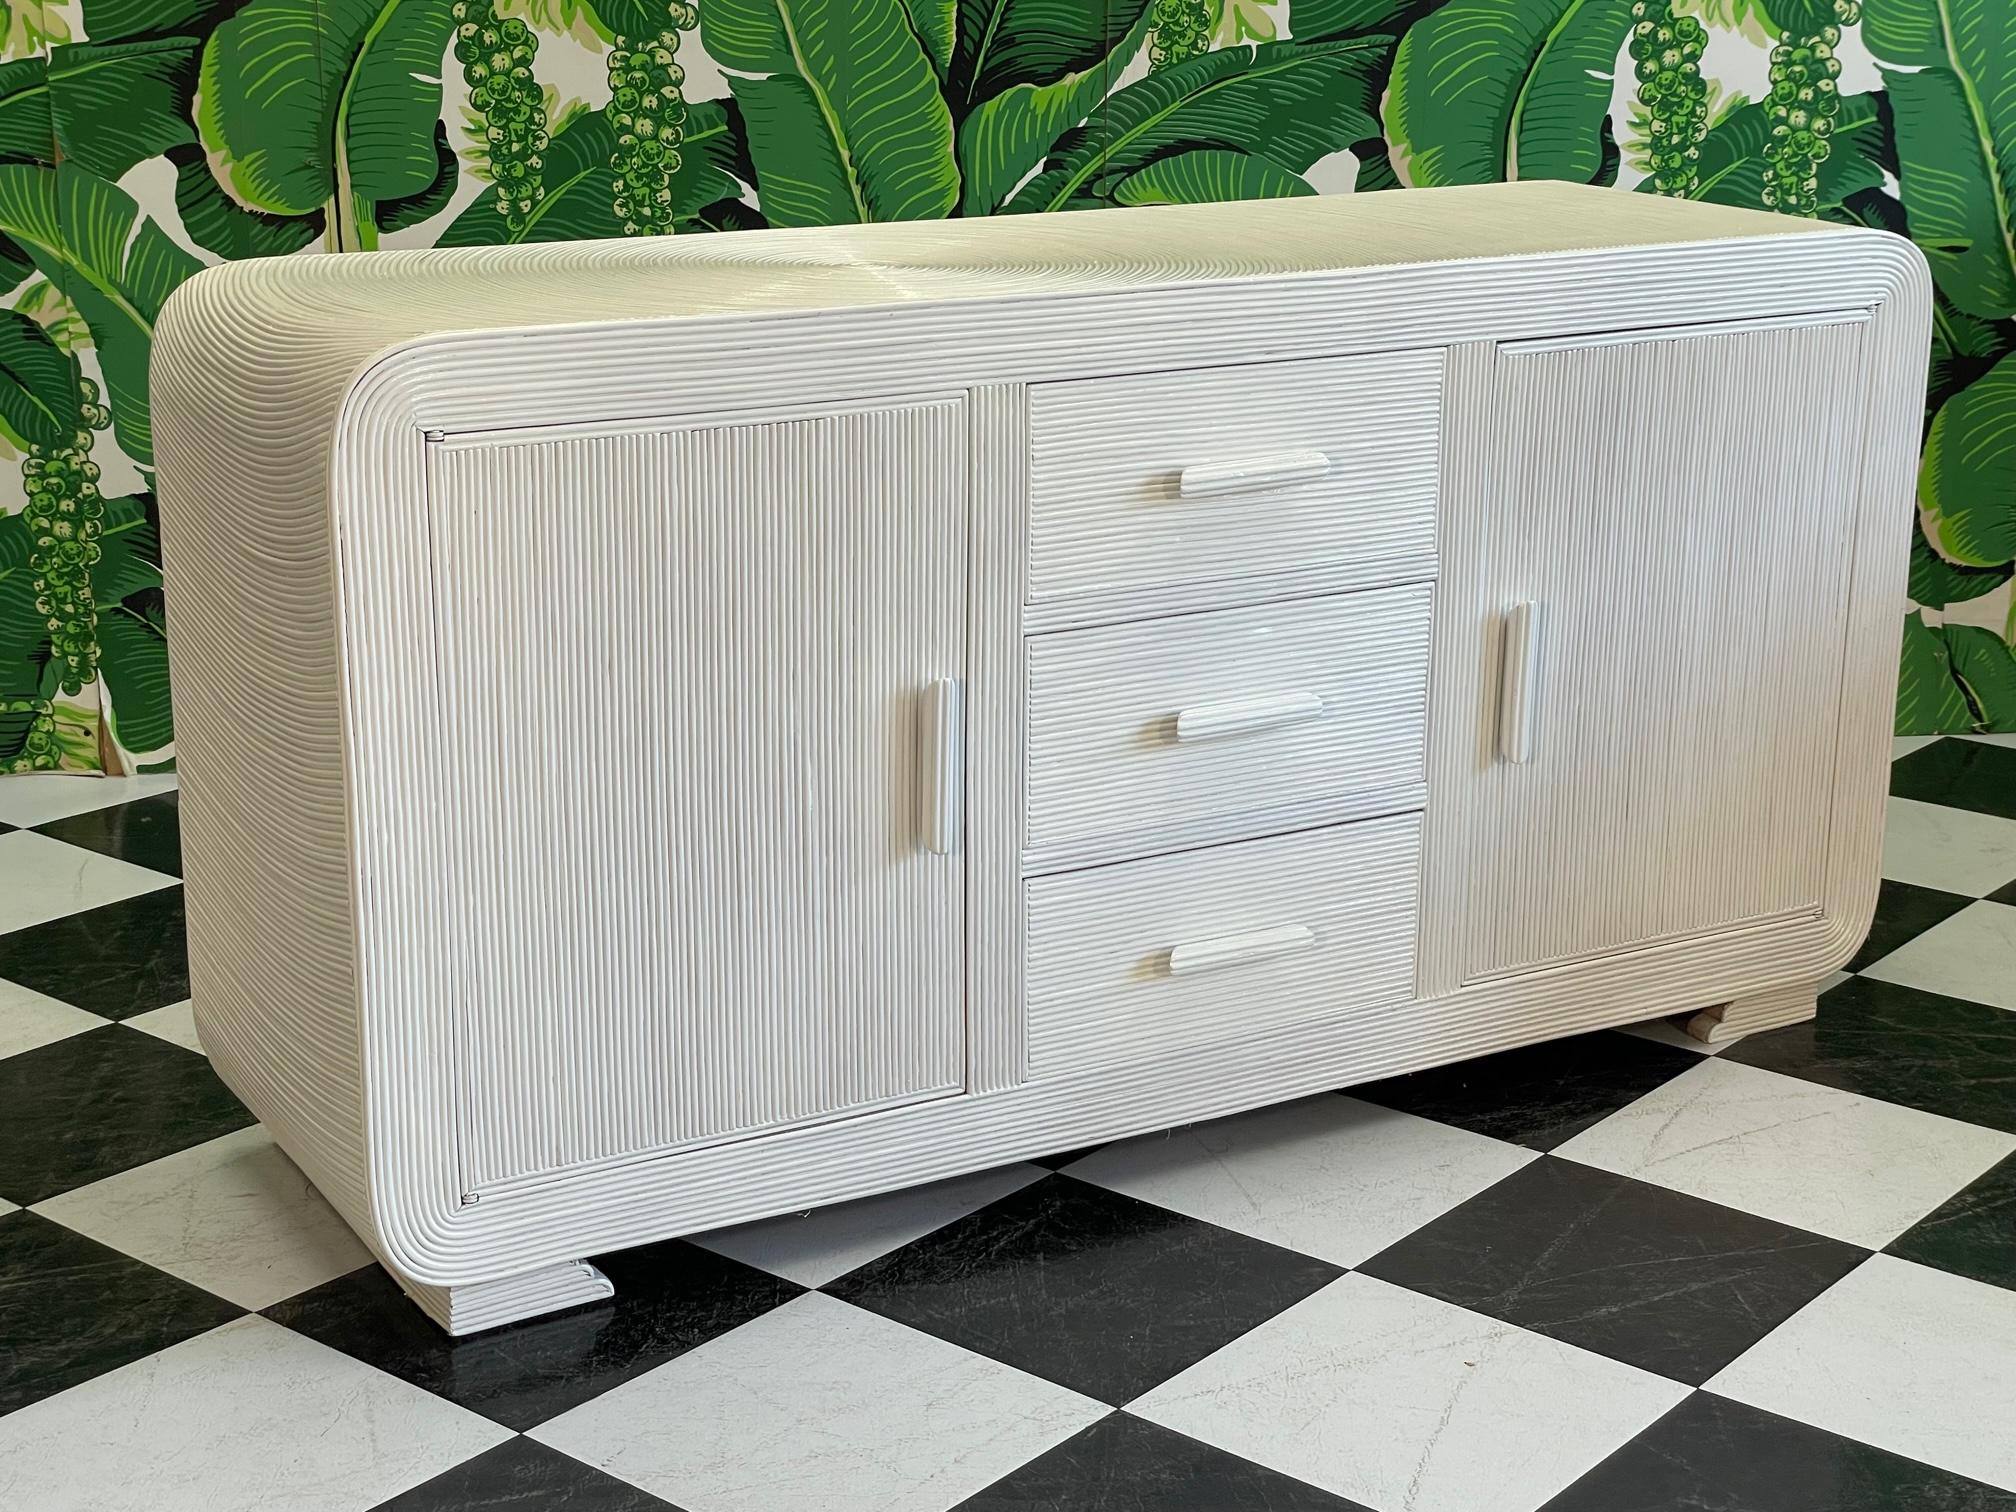 Vintage rattan dresser features a full veneer of pencil reed in the iconic 